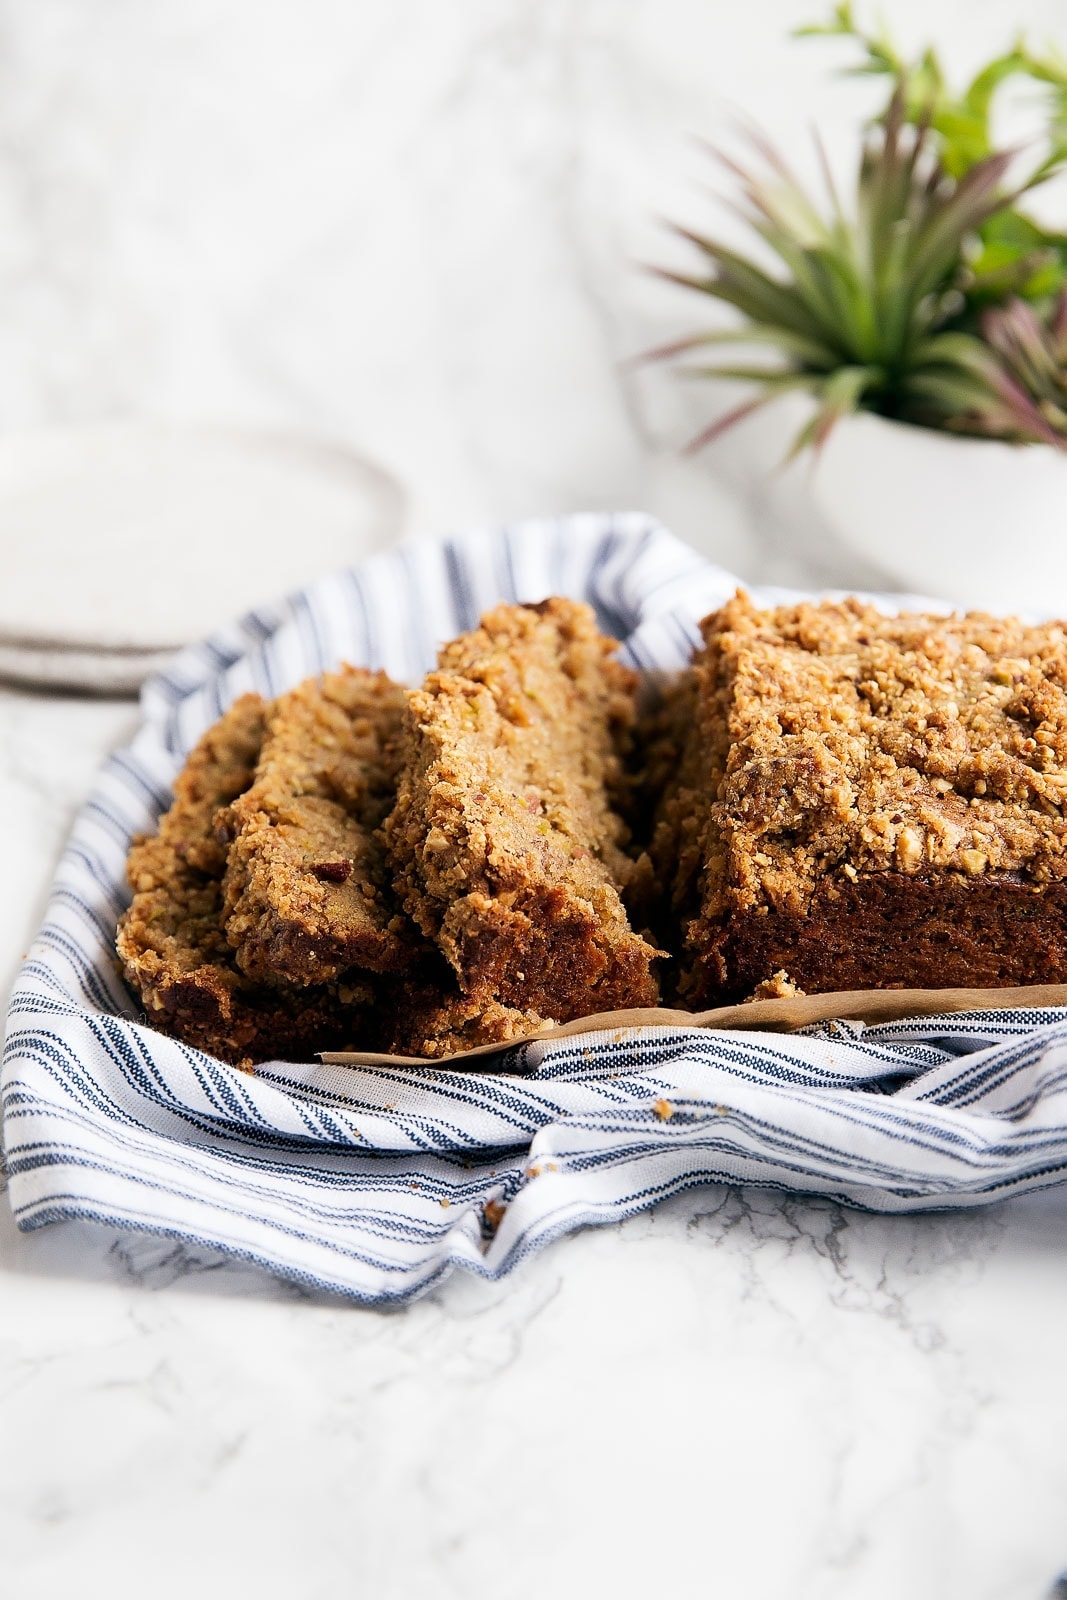 A moist zucchini bread topped with the most addicting cardamom pistachio crumble. I'm officially warning you: if you make this, it will be gone in approx. 1 hour. Enjoy :)